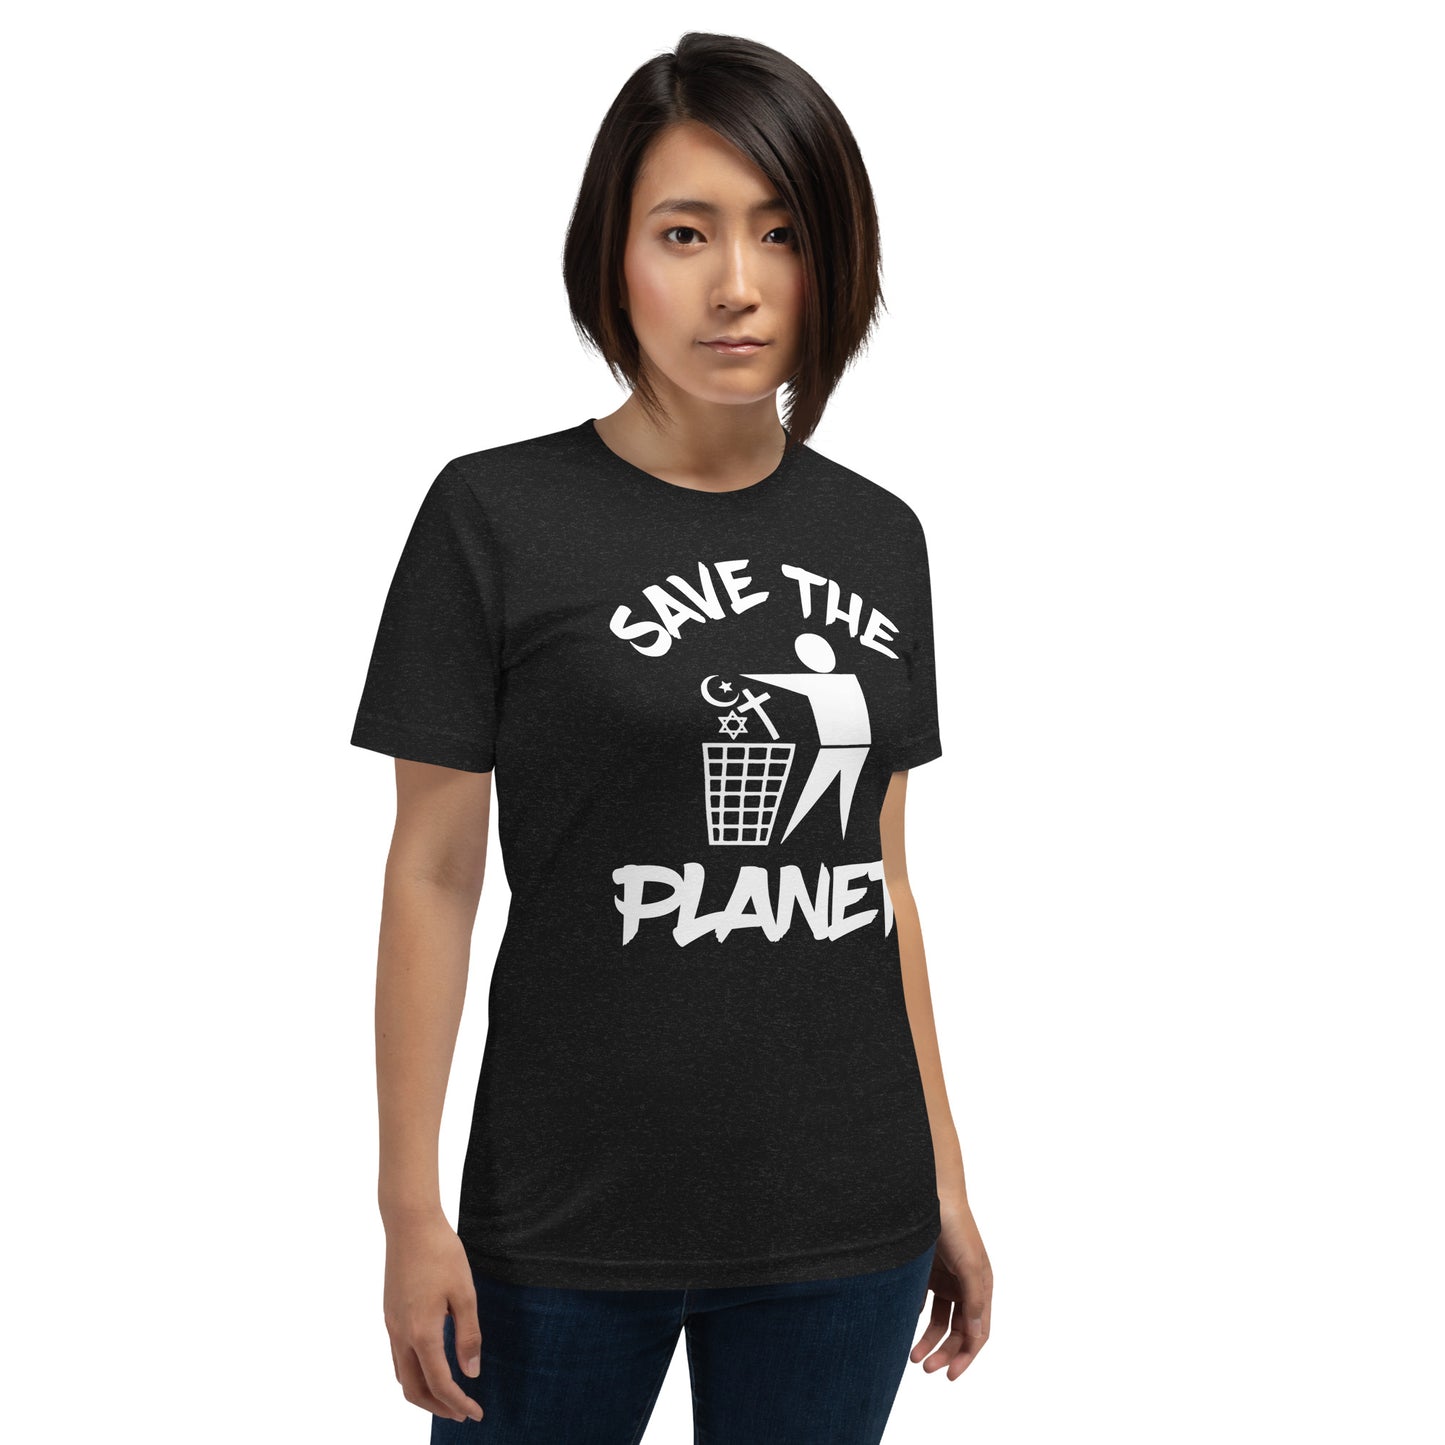 Save the Planet Unisex t-shirt,